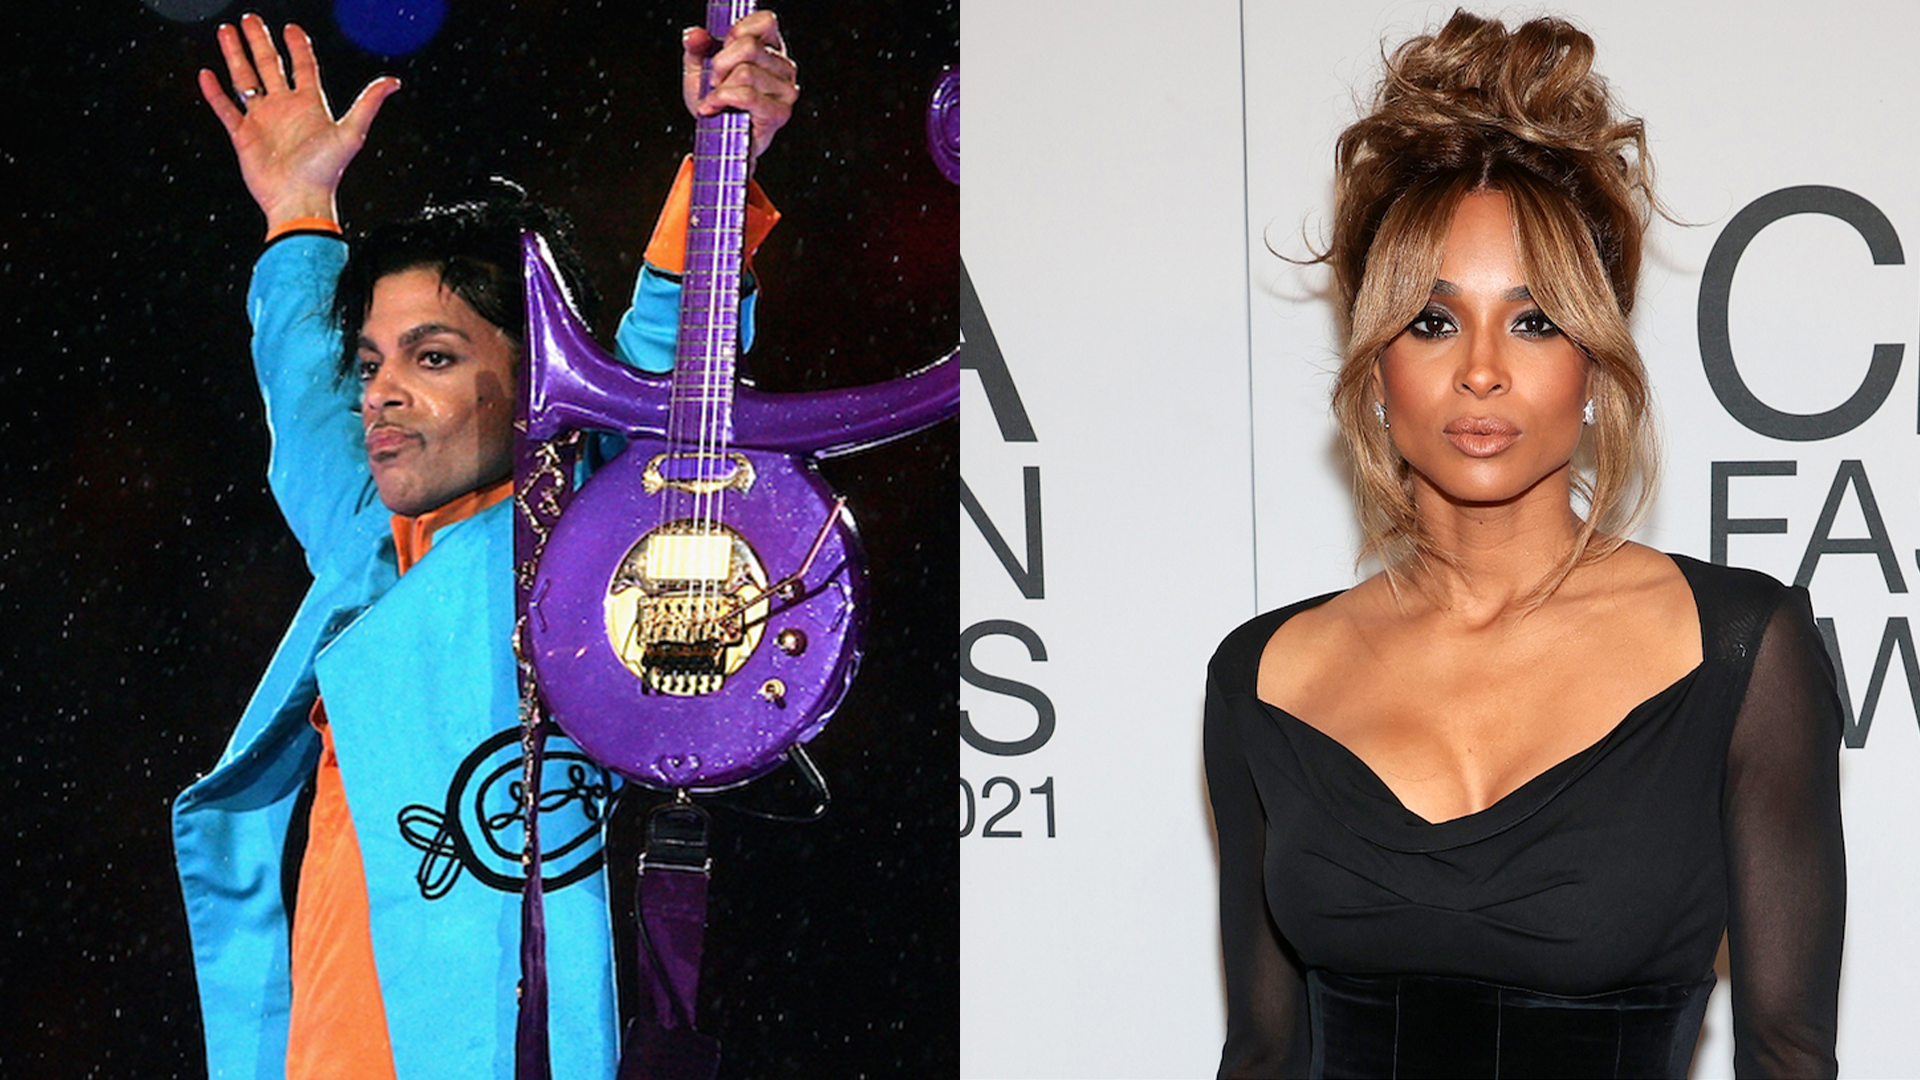 Ciara Recalls Being Inspired By Prince To Level Up And Own Her Master Recordings  —  'Amazingly Enough, They Gave Me My Masters'